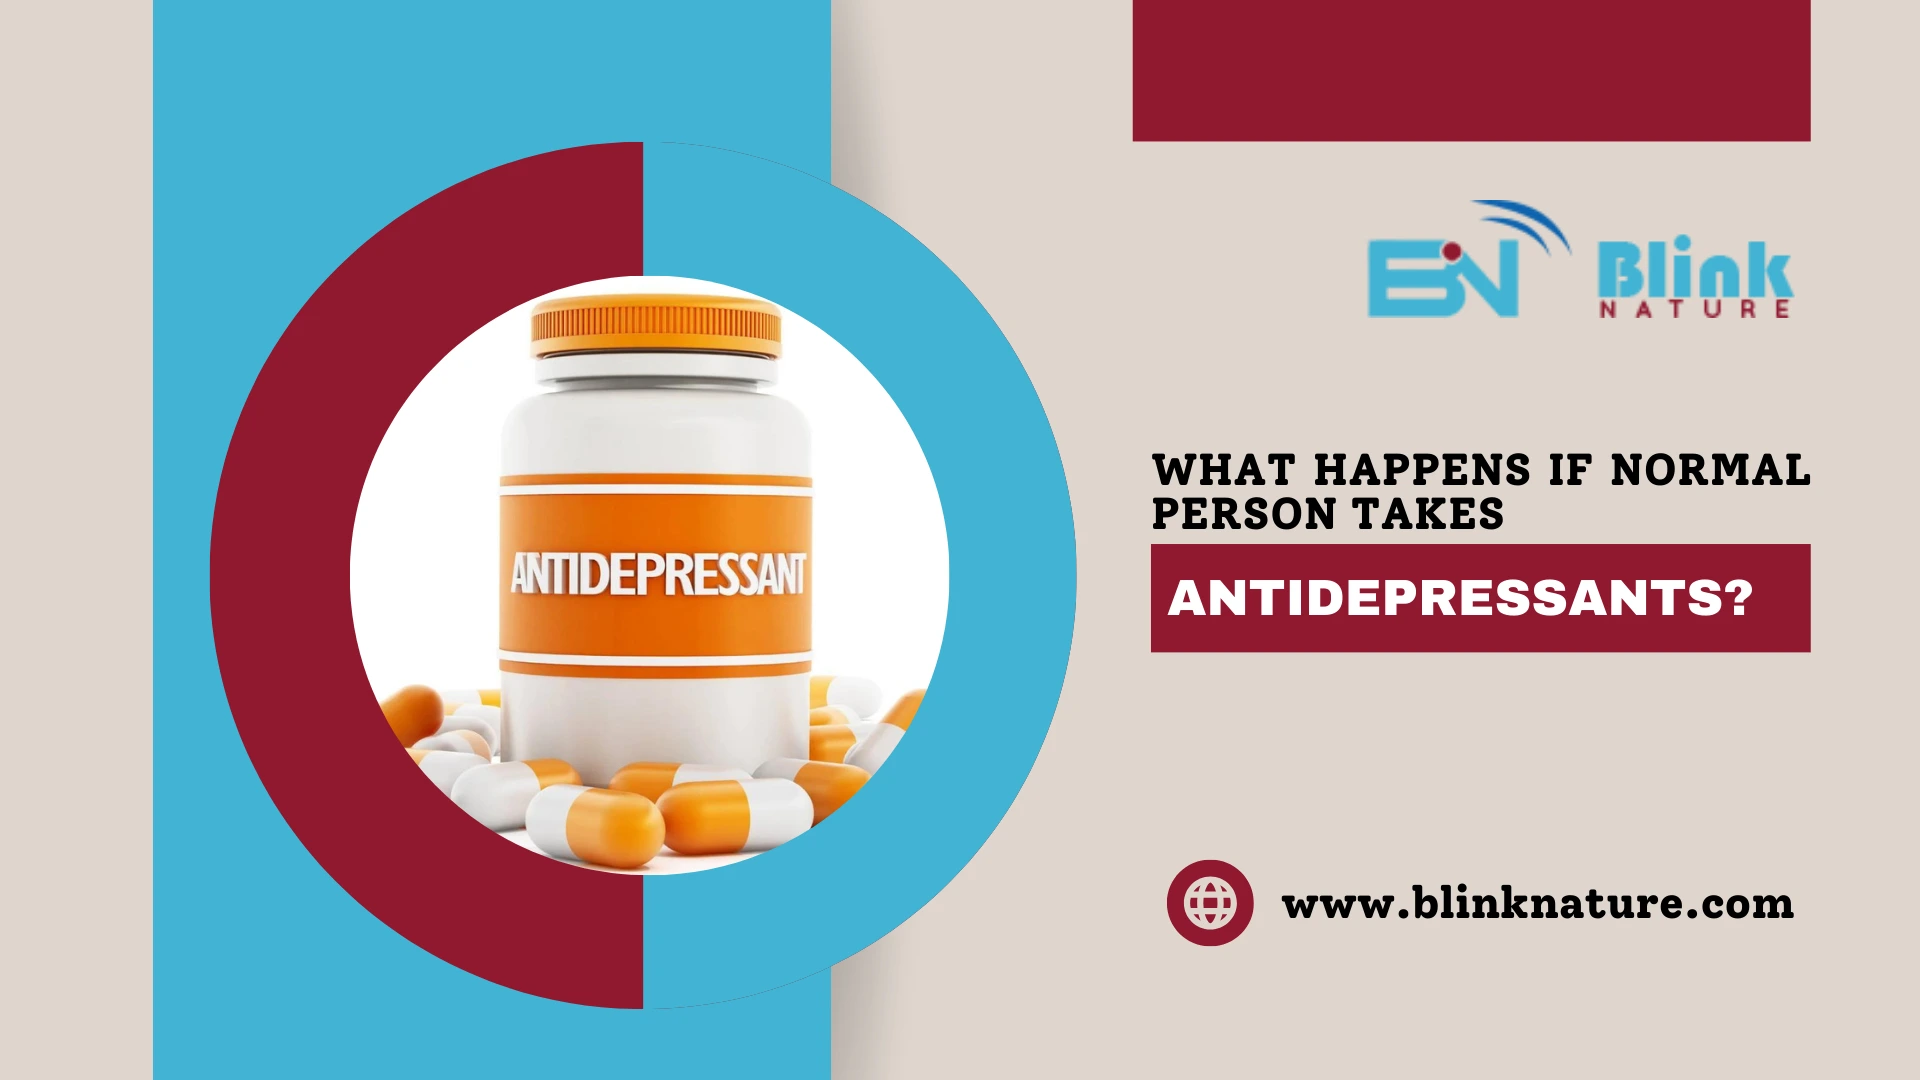 What happens if normal person takes Antidepressants?